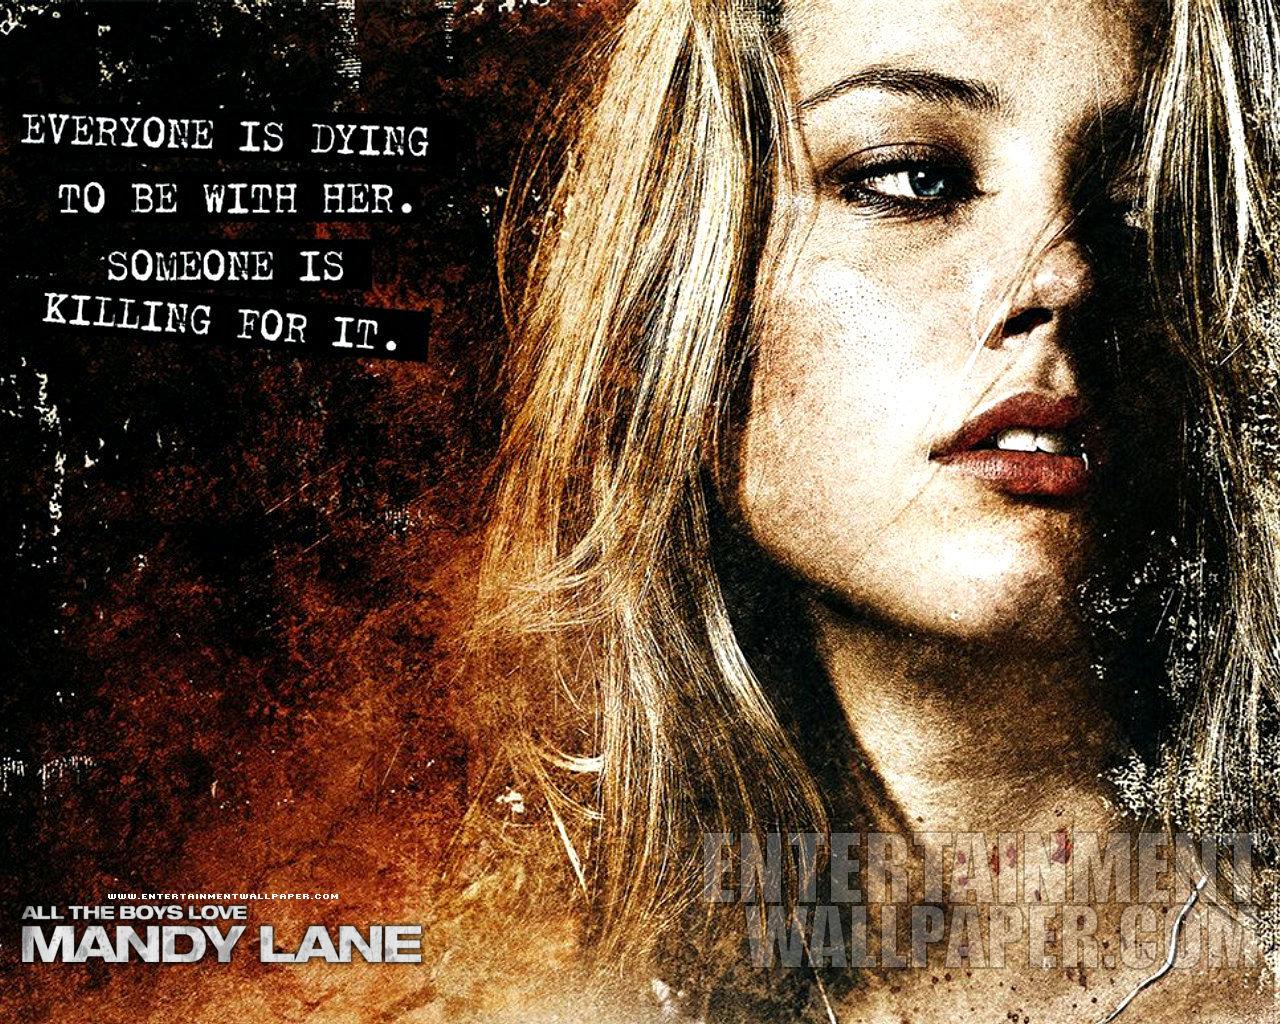 http://www.sortiedesecours.info/wp-content/uploads/2011/04/all_the_boys_love_mandy_lane02.jpg